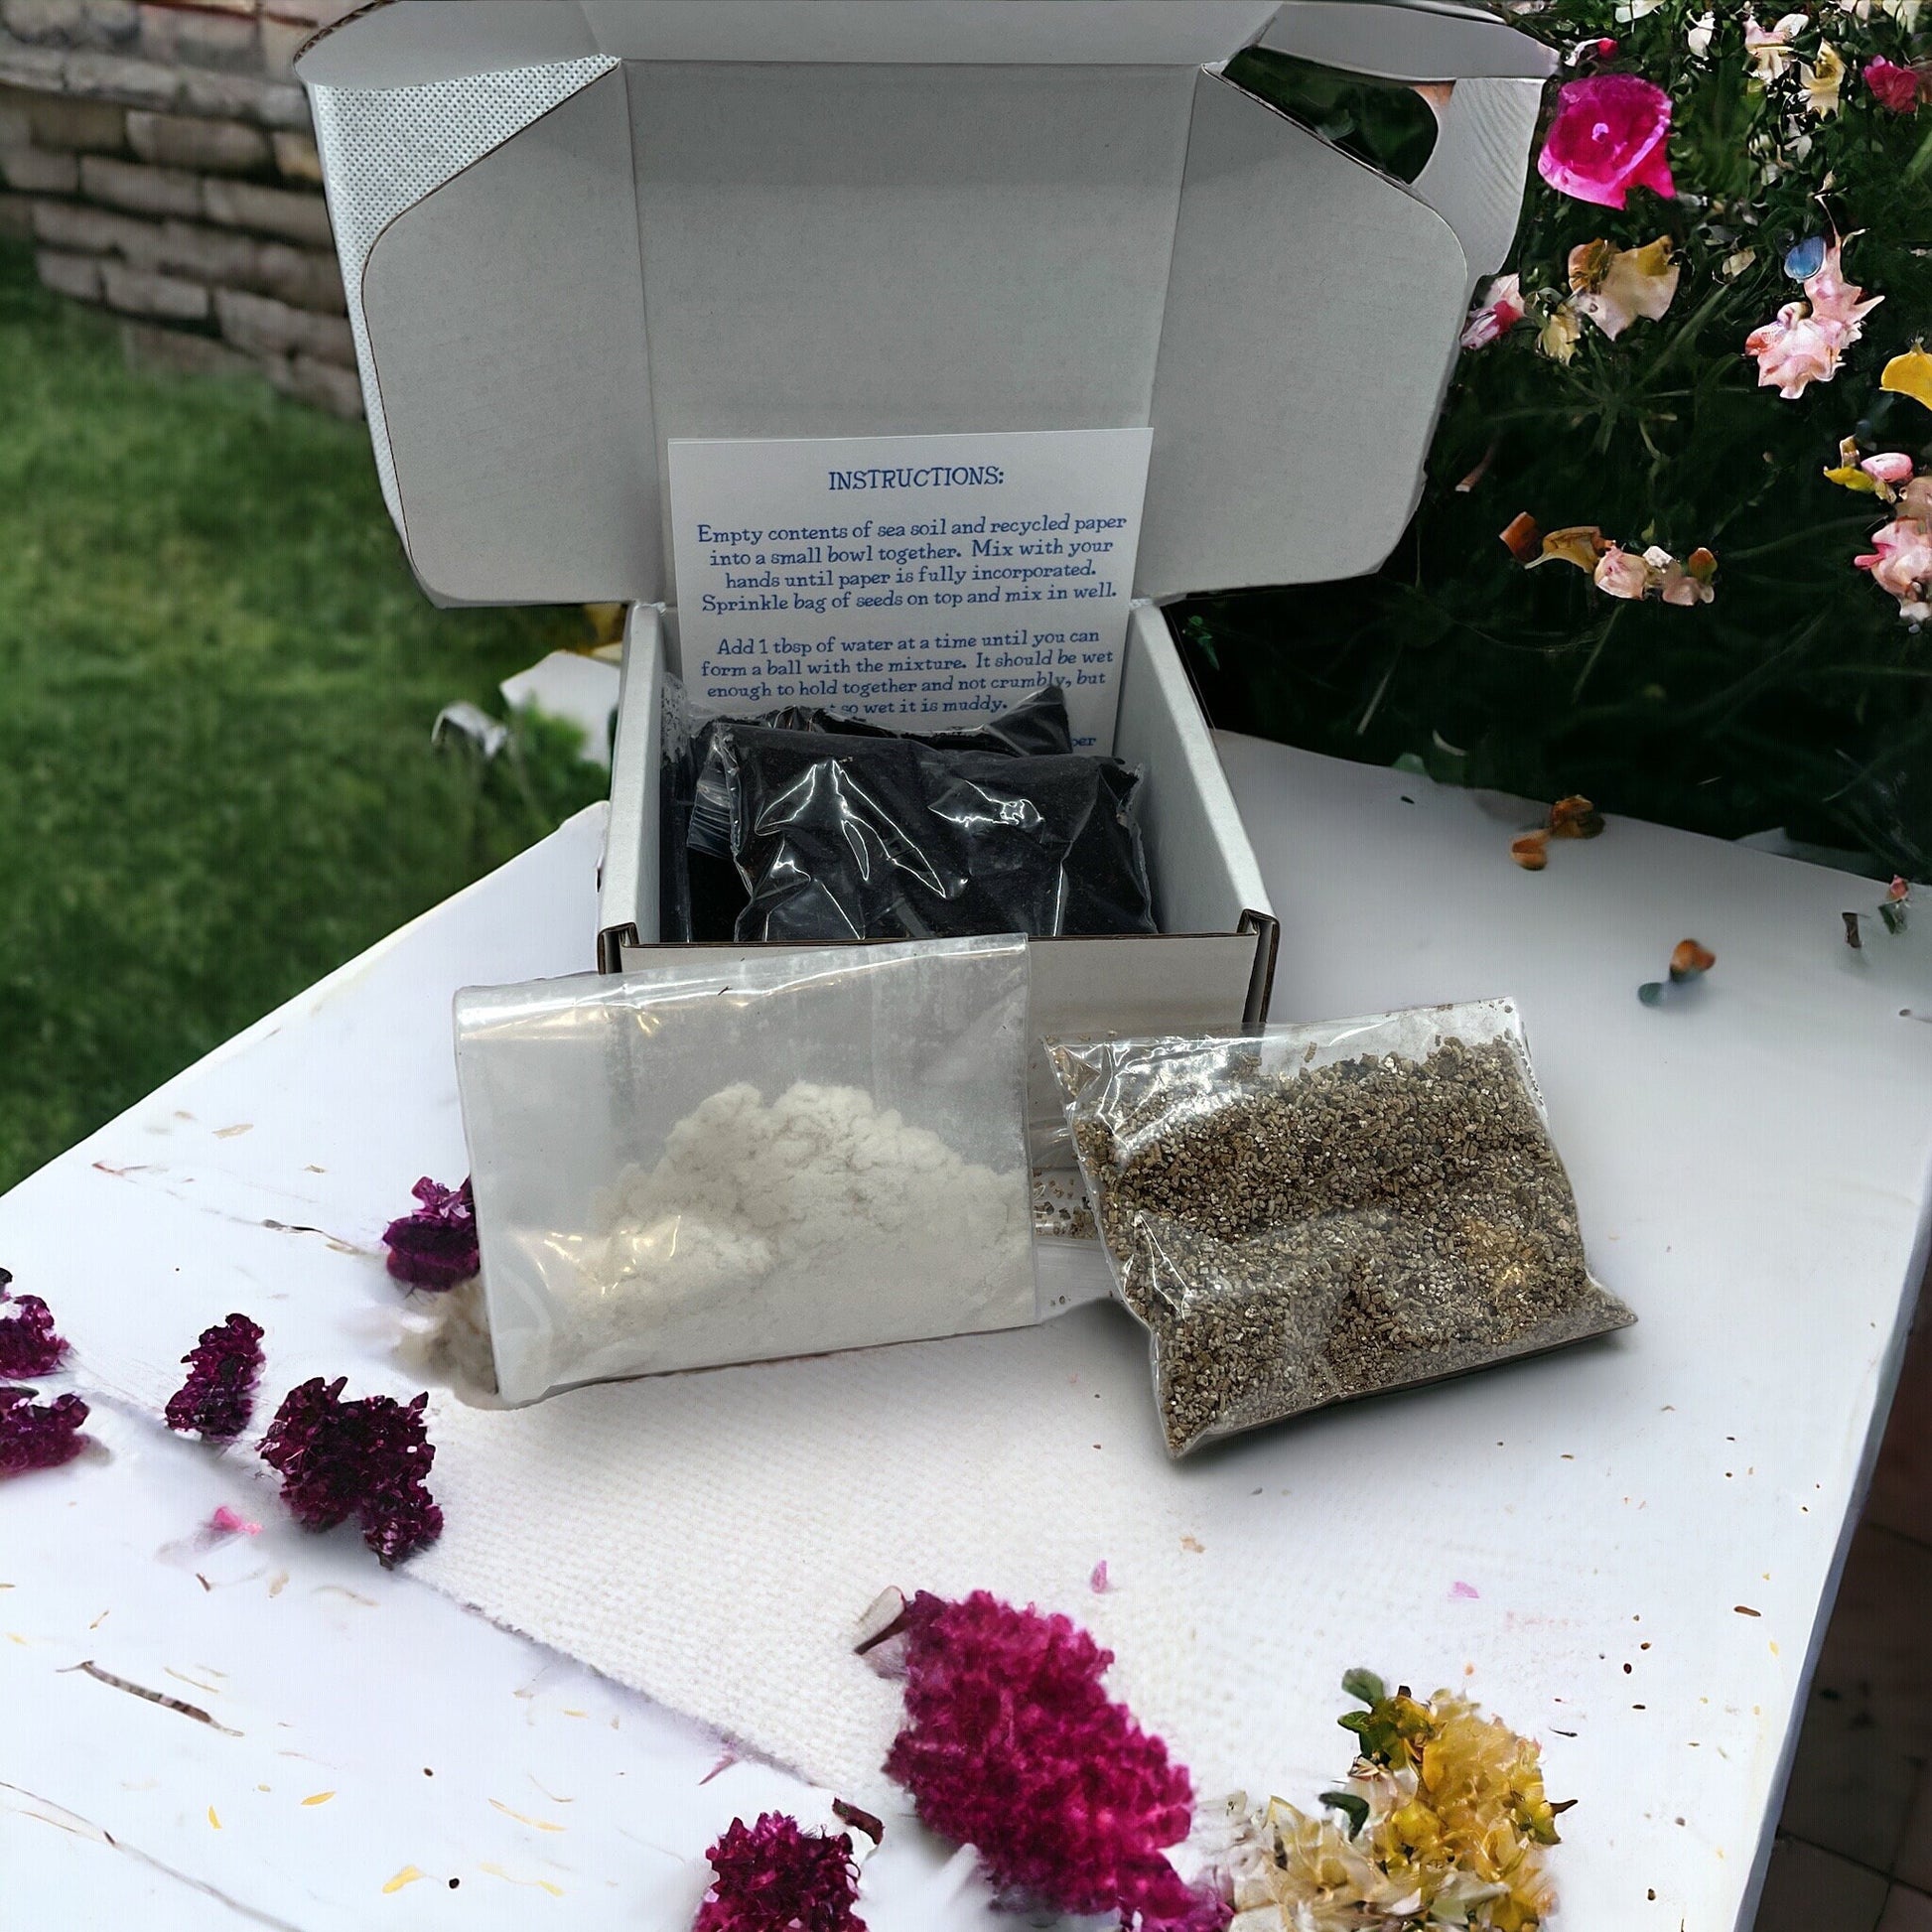 Seed Bomb - DIY Kits - Create your own Green Oasis - Canadian Wildflower